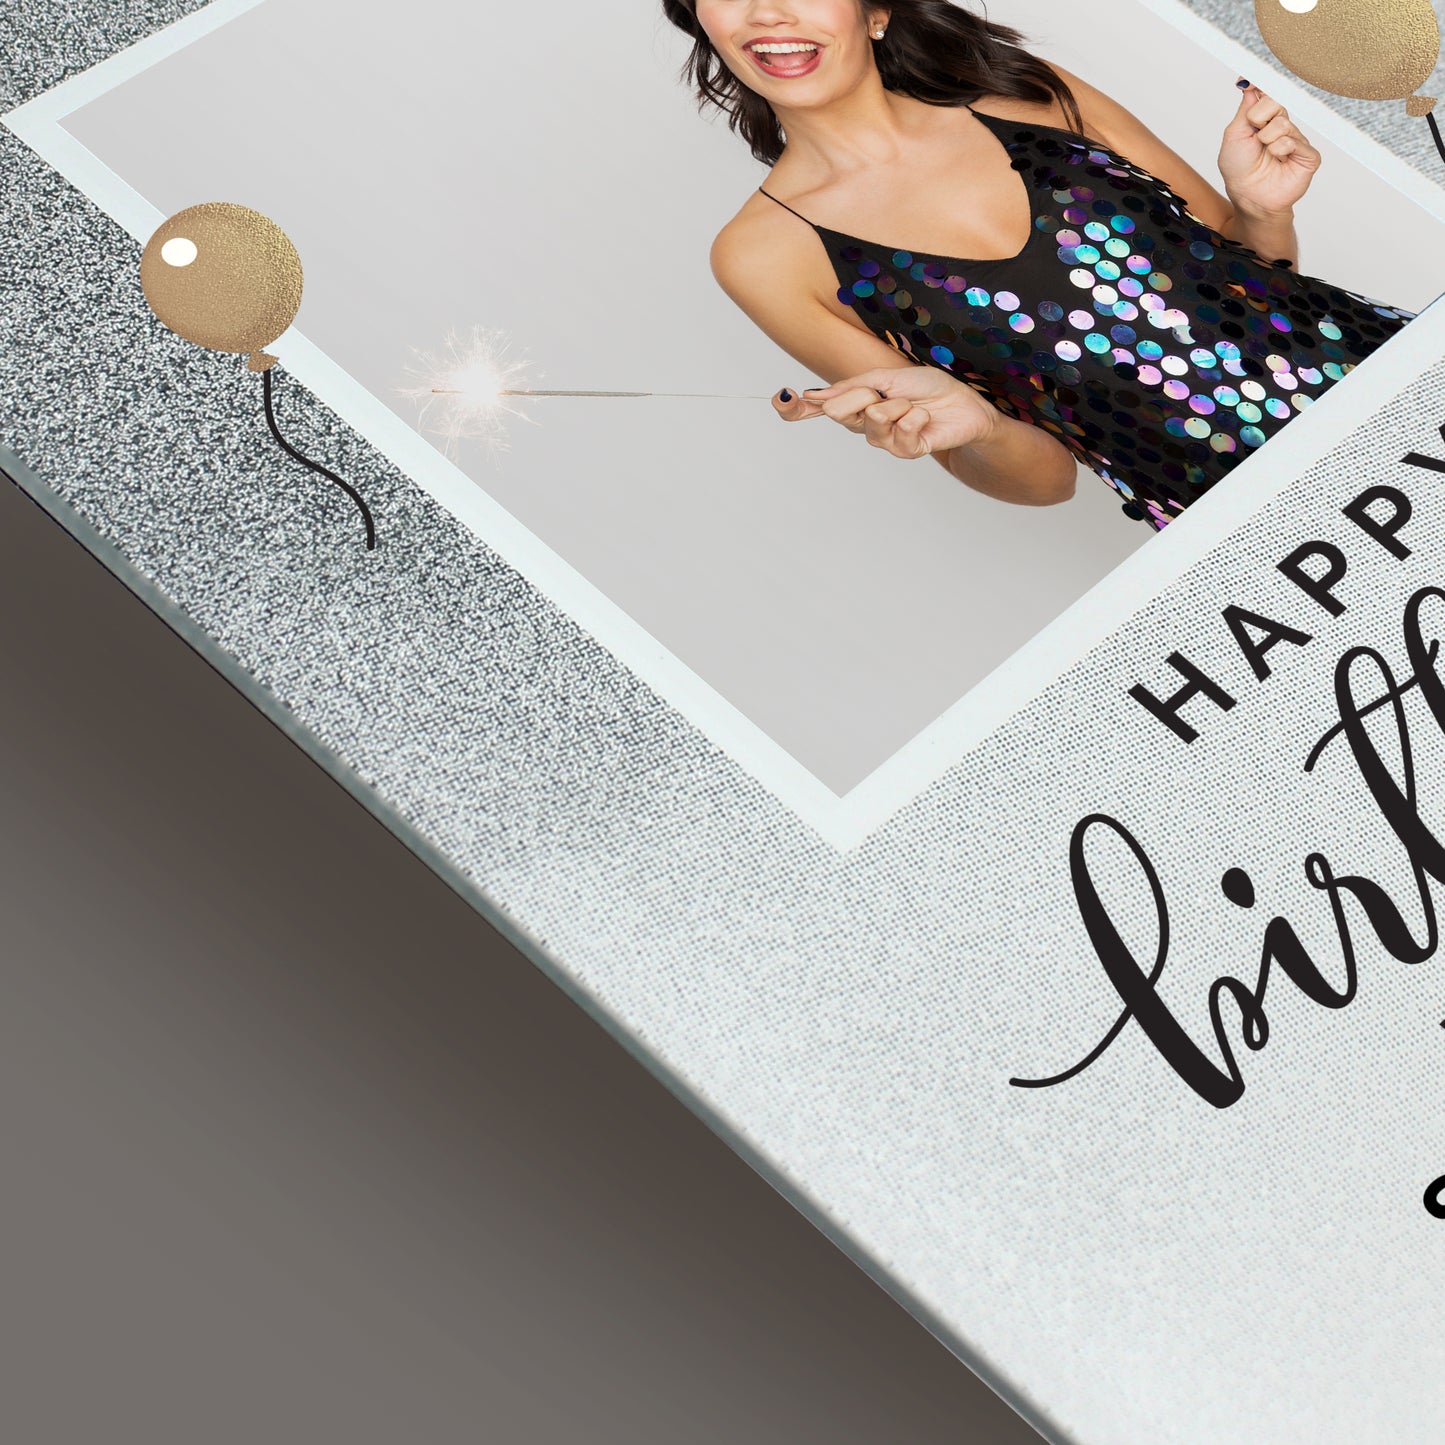 Personalised Any Age Birthday 4x4 Glitter Glass Photo Frame